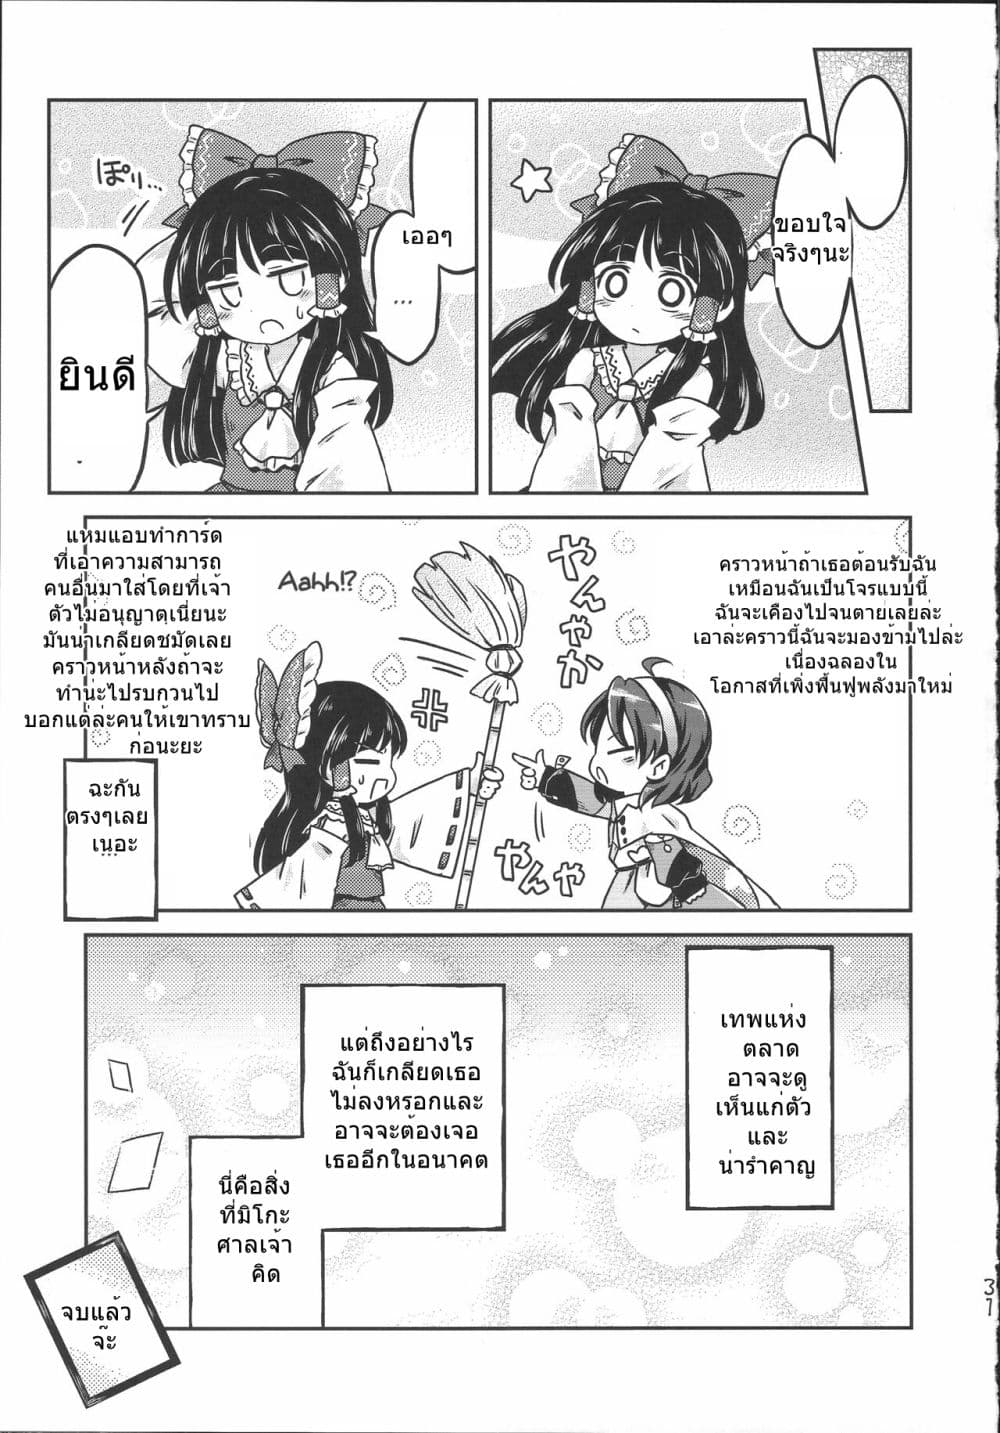 Touhou Project Chima Book By Pote ตอนที่ 1 (30)